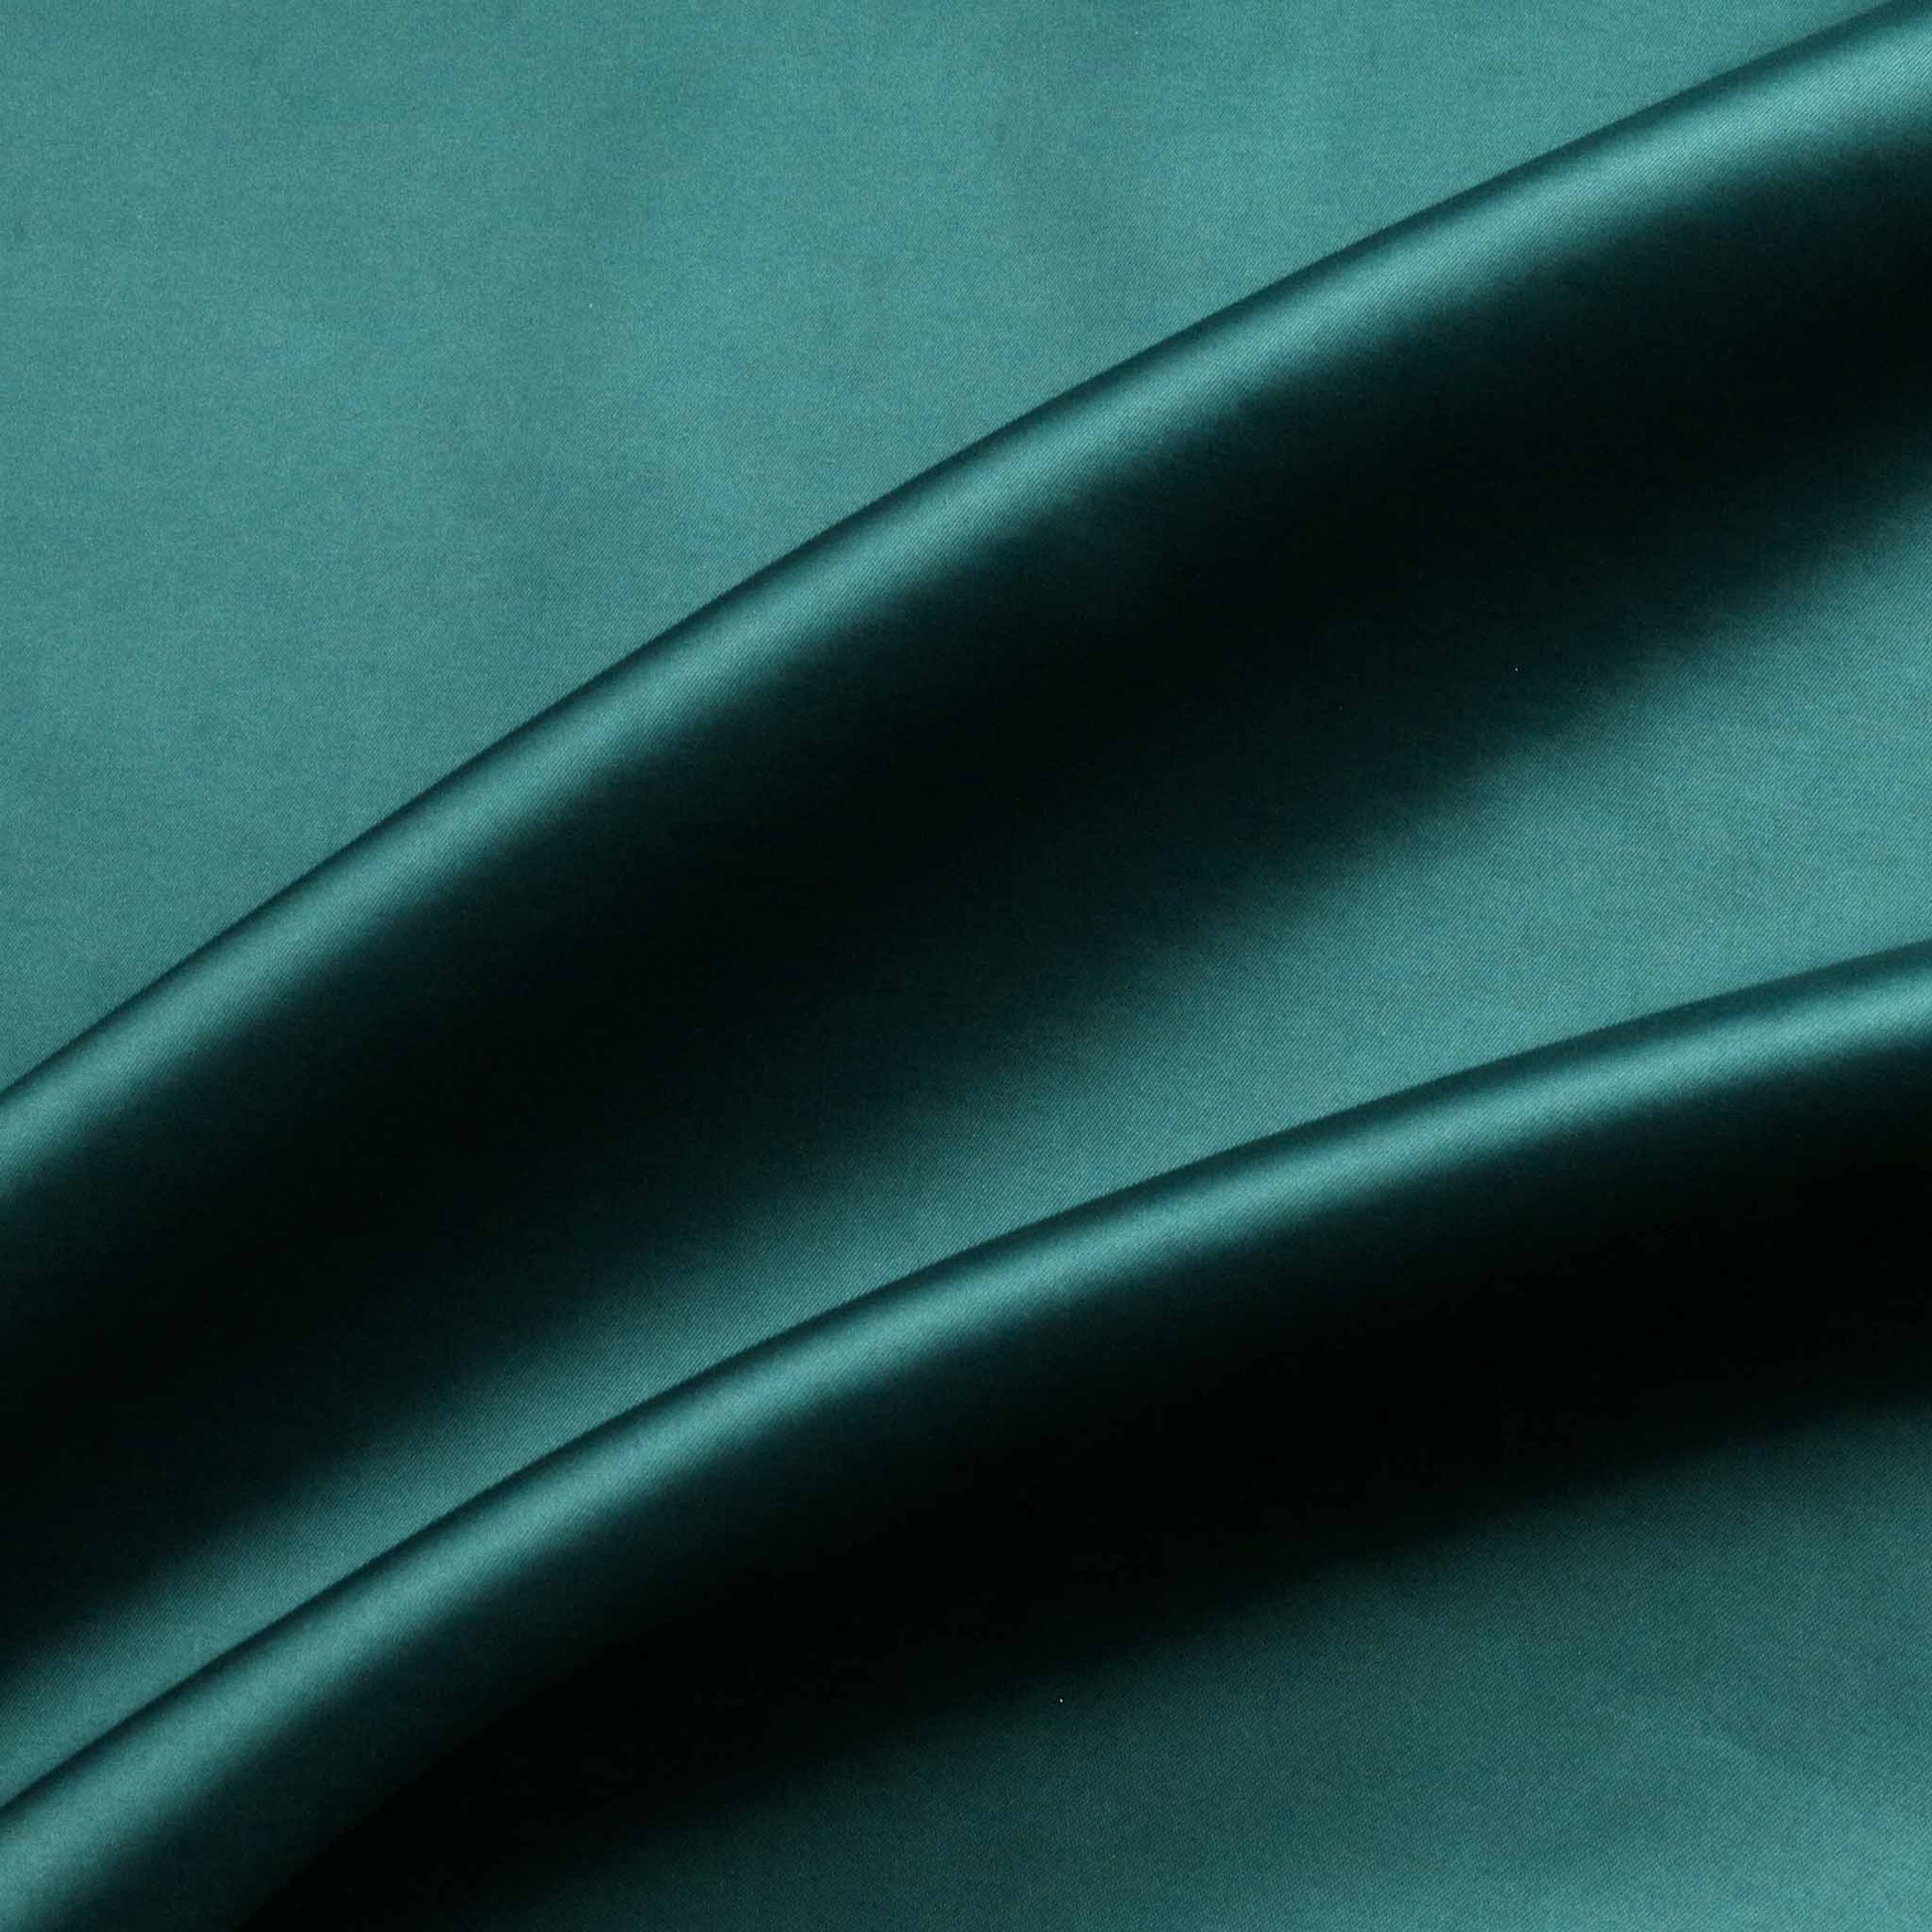 stretchy dressmaking lining fabric in teal and turquoise colour